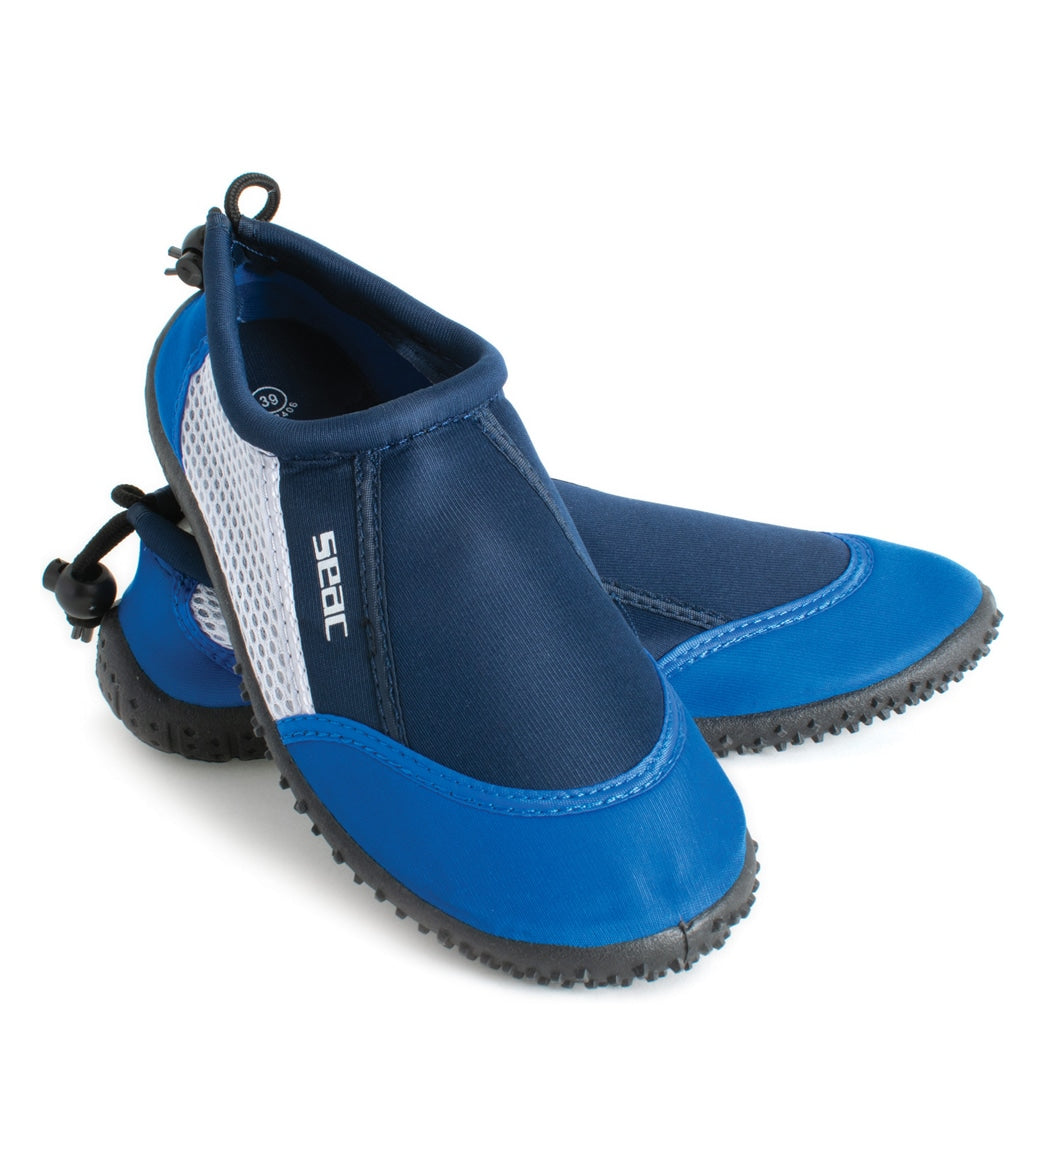 Seac USA Reef Water Shoes